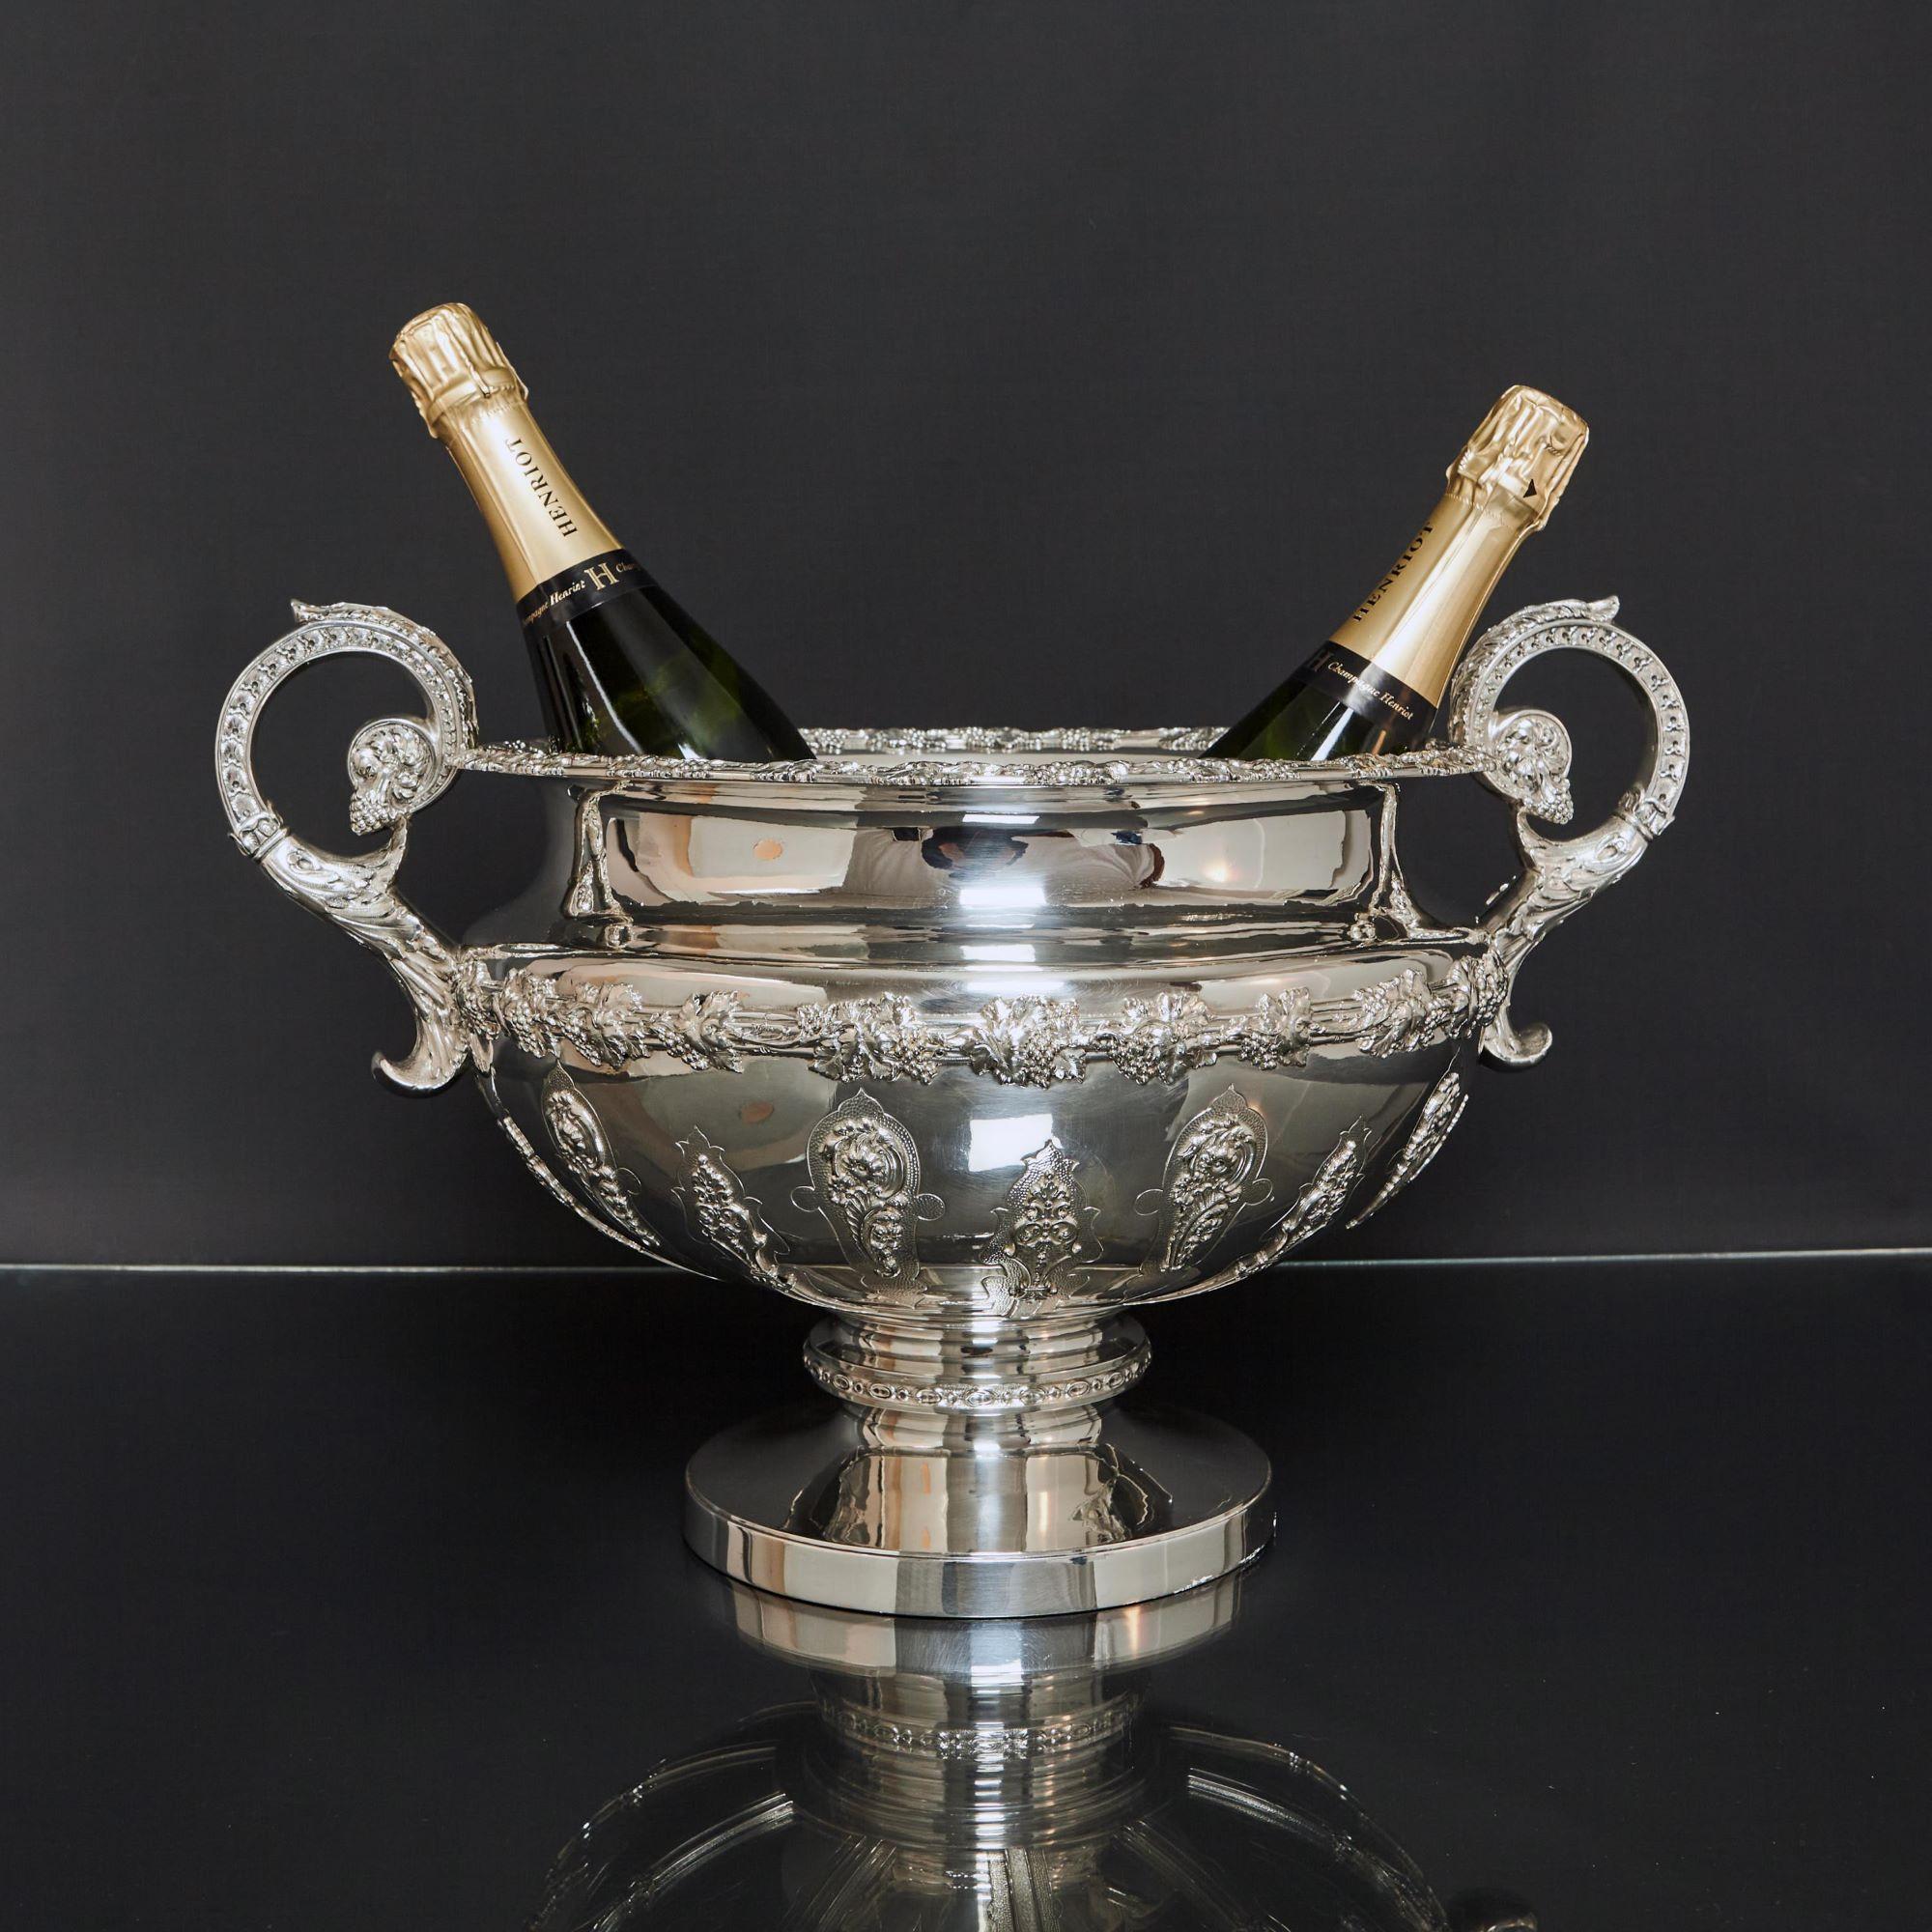 A large, impressive and fine quality silver wine cooler made at the turn of the 20th century by Mackay & Chisholm at 59 Princes Street, Edinburgh. The lower half of the body of this silver wine cooler is hand chased with Lamerie-style strapwork